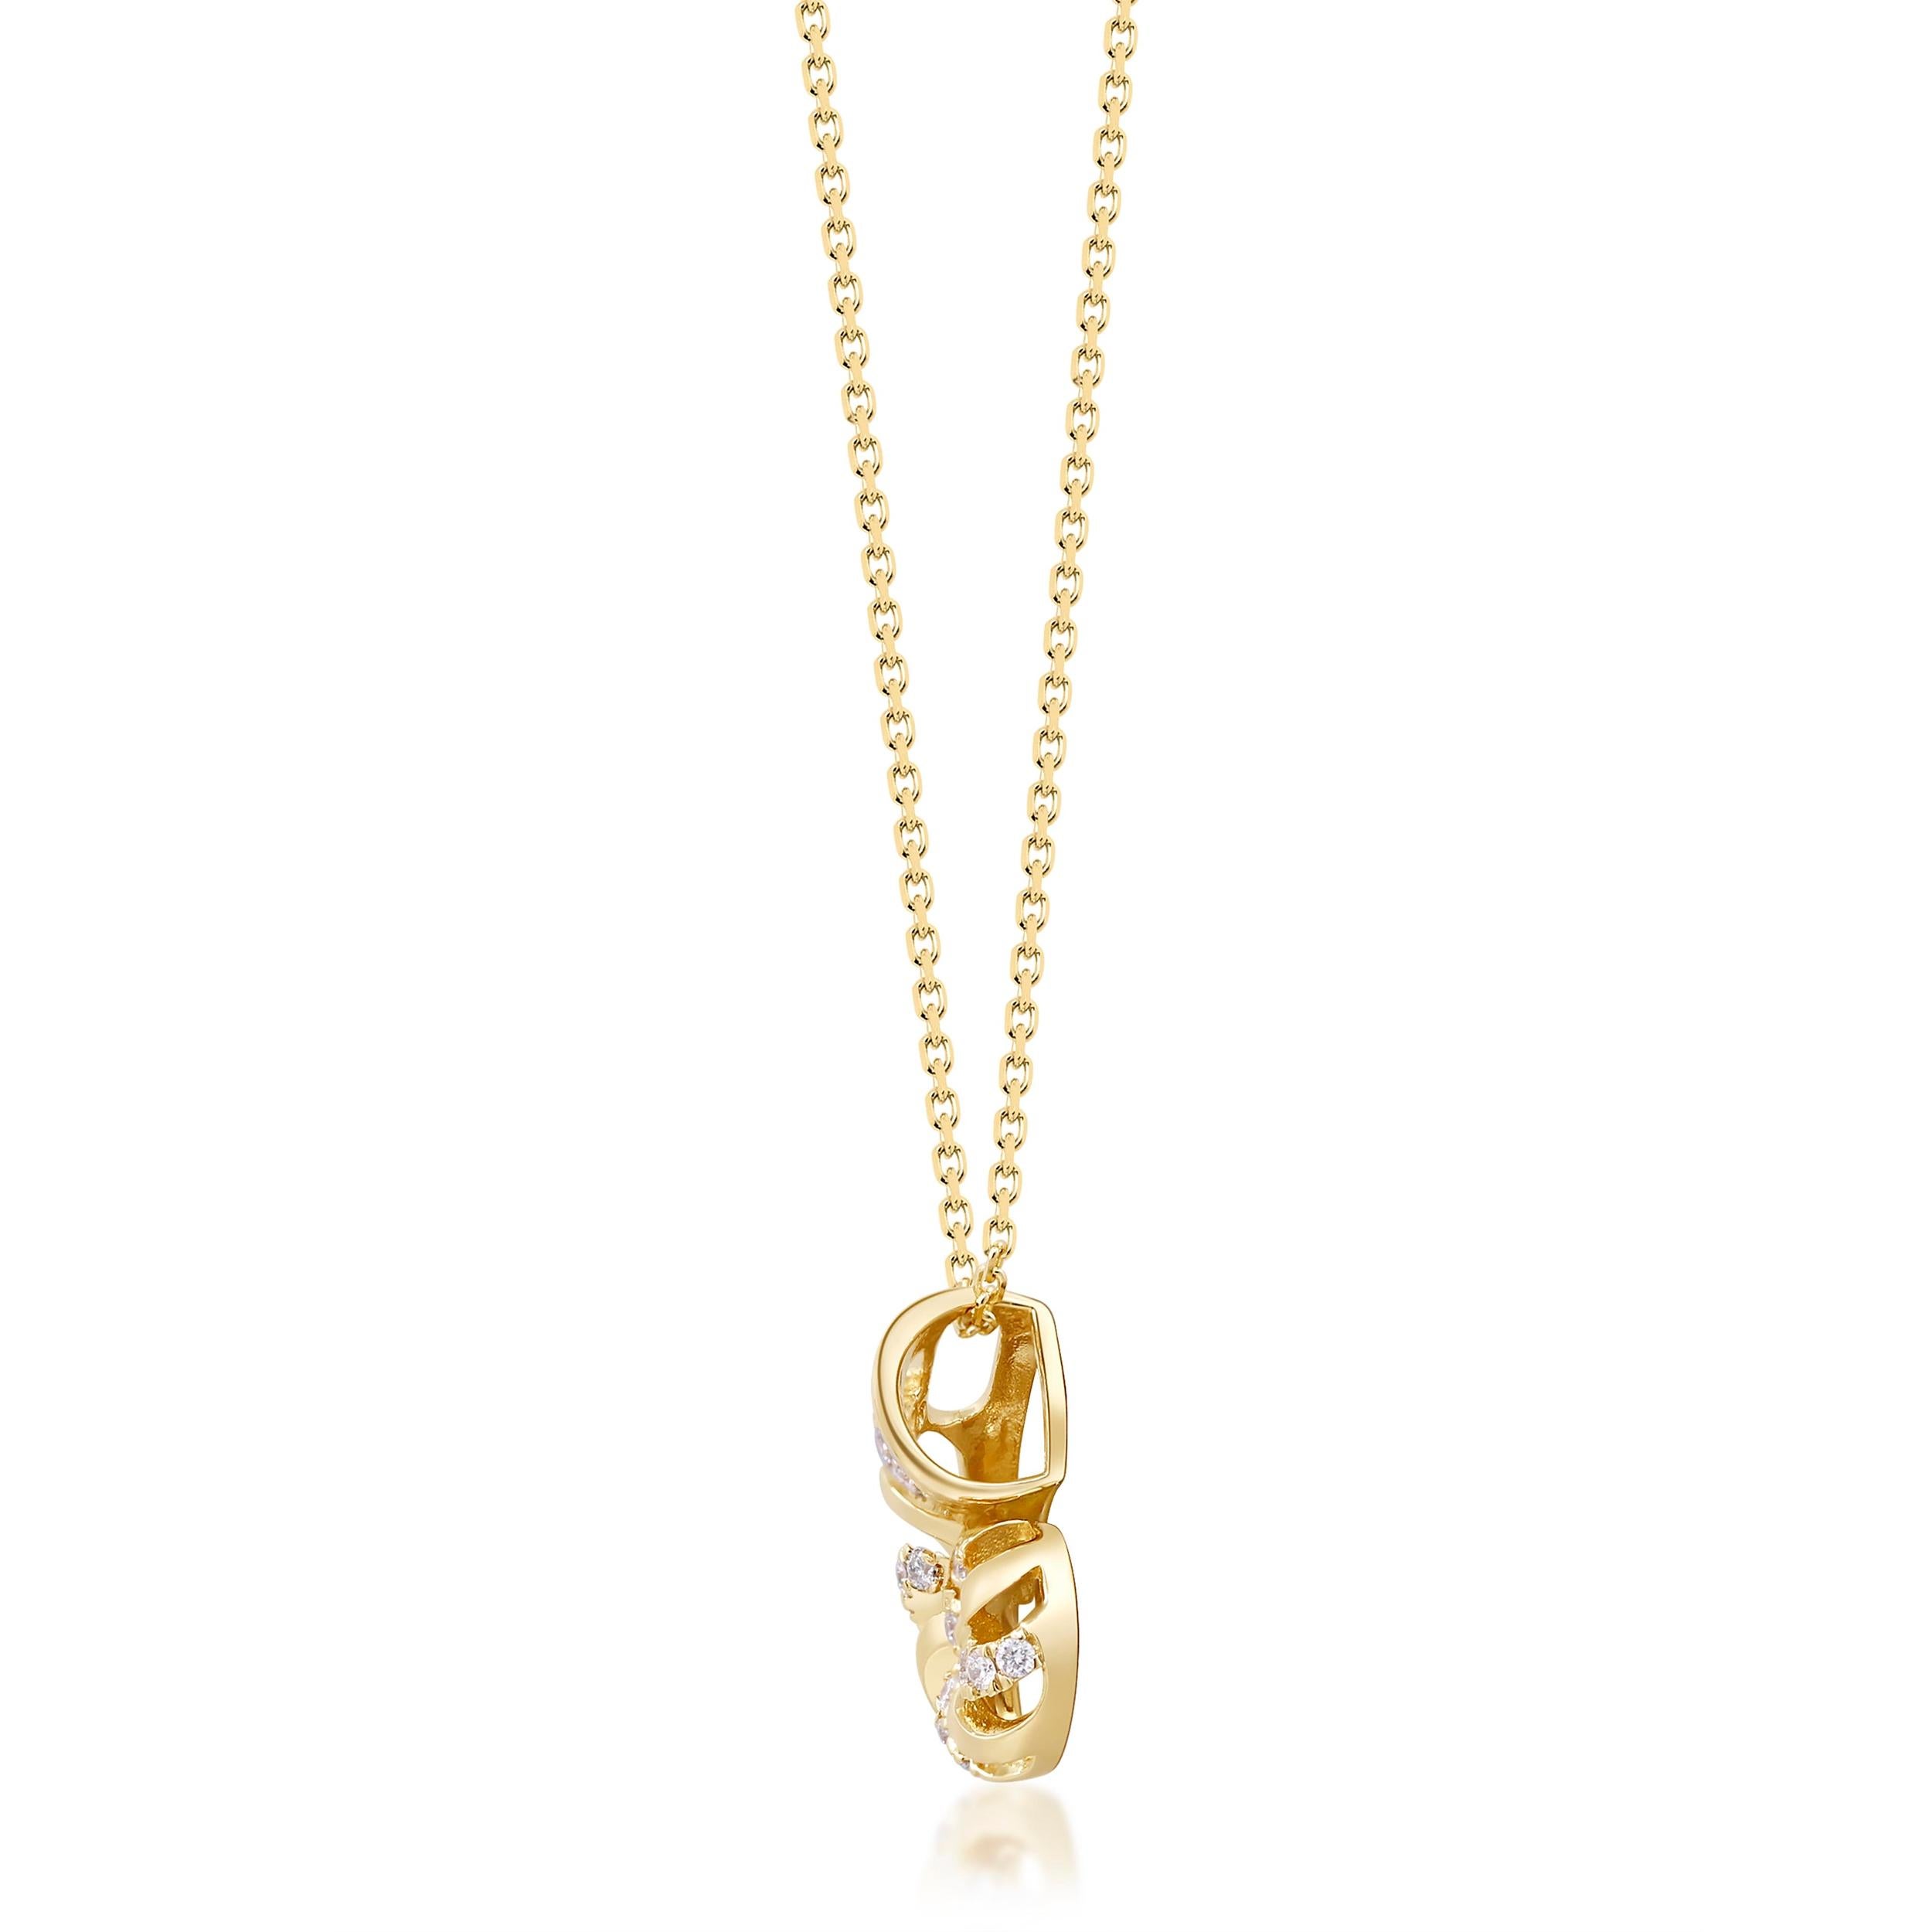 ♥ This magnificent 14K Yellow gold seashell pendant necklace allows you to capture the splendor of a natural phenomena. 
* The Smithsonian Jewelry collection which is launched in 2022 in collaboration with Gin and Grace is inspired by our country’s